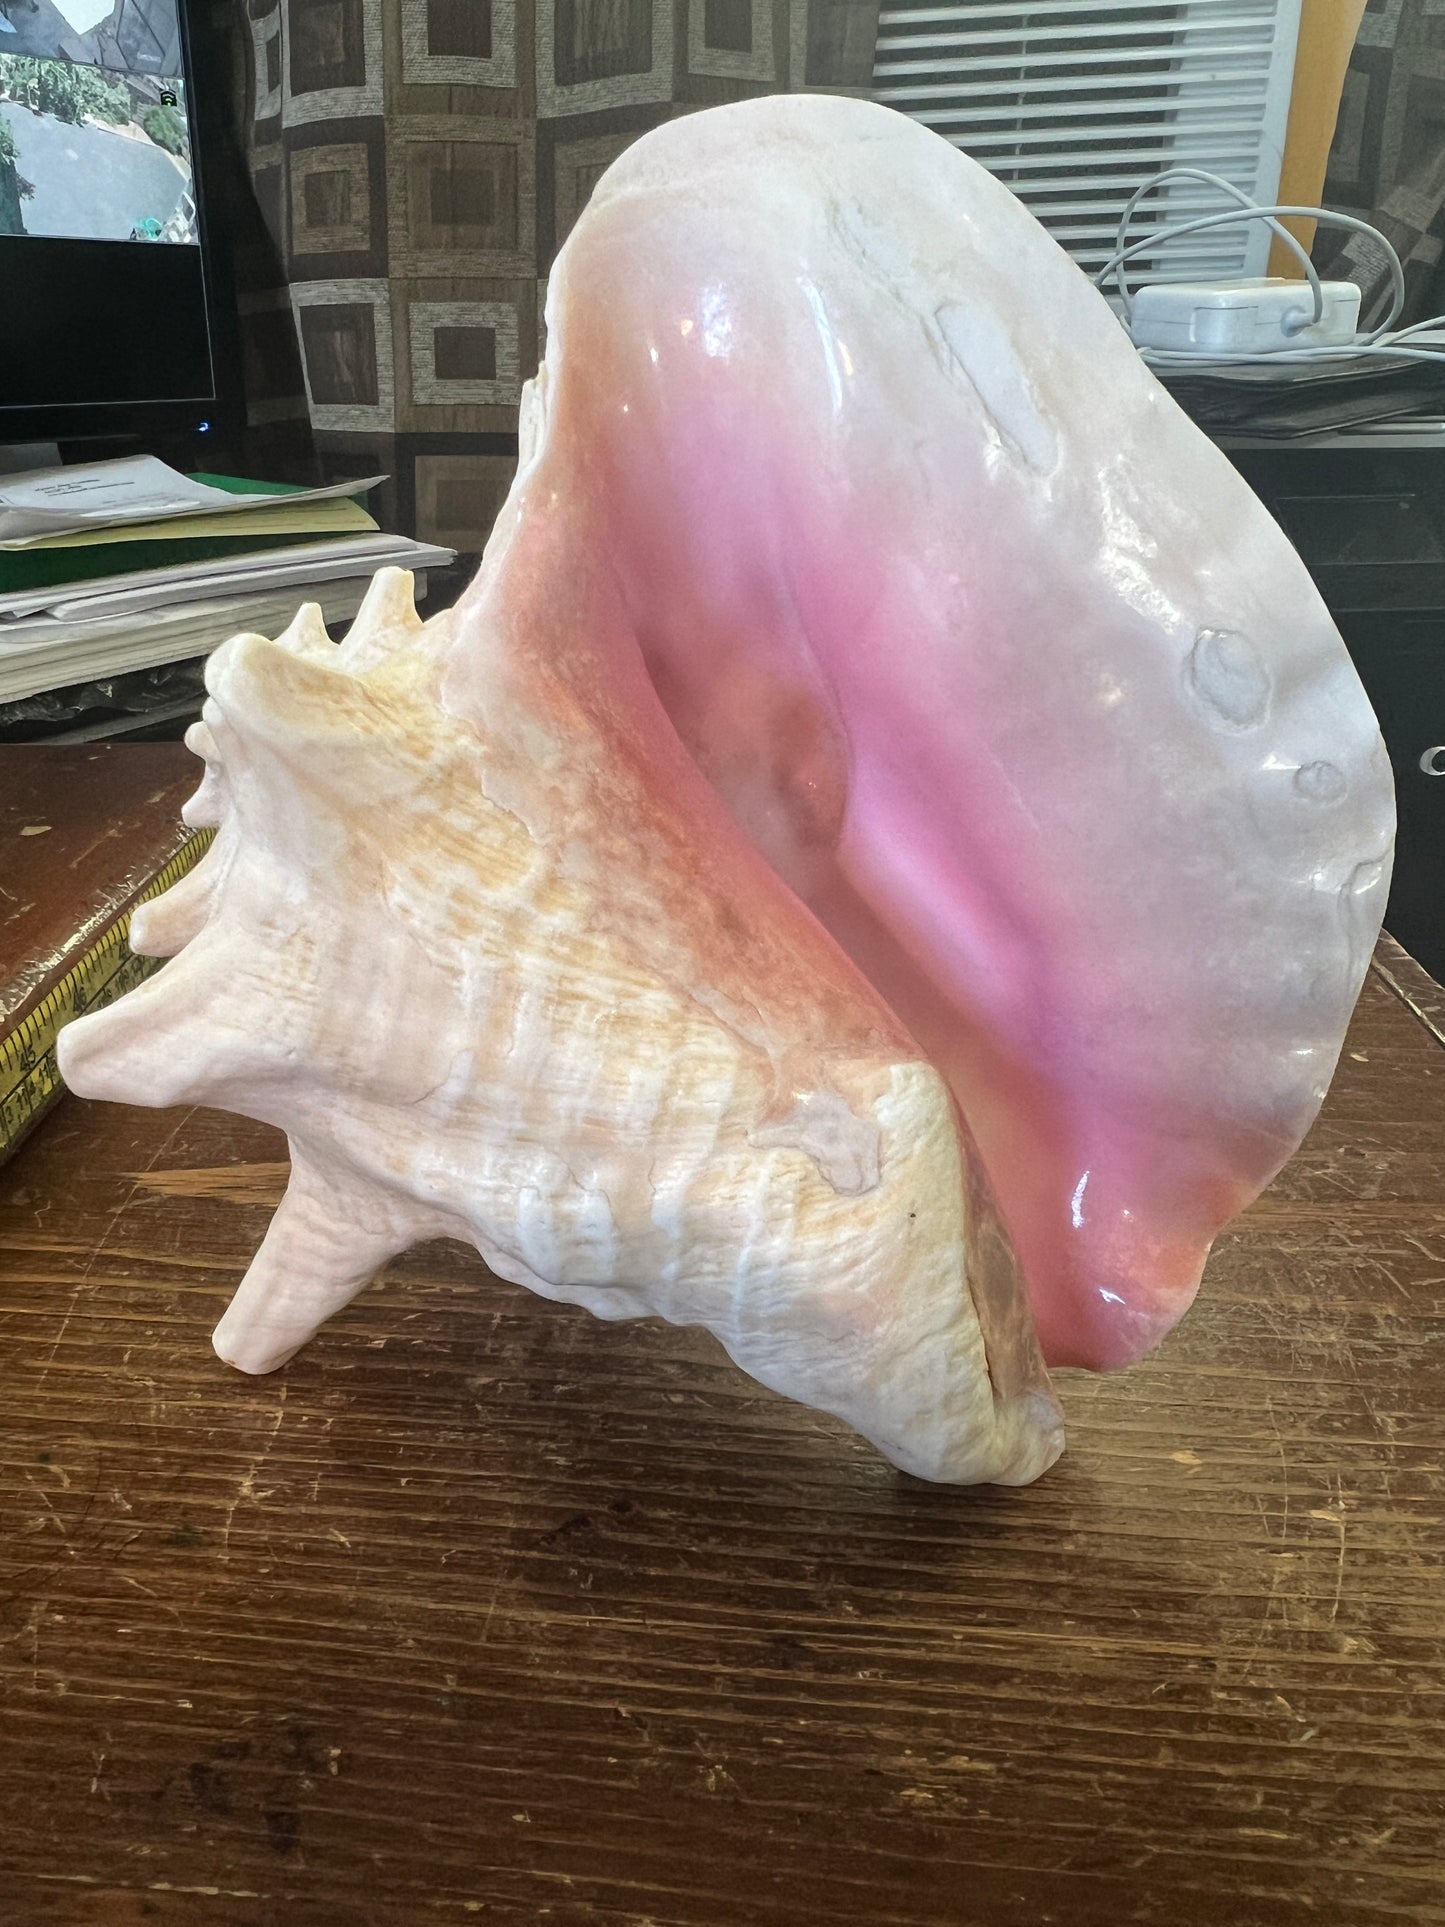 Aztec Conch Shell Trumpet, Mayan Conch Trumpet, Mexico, Mexican, Ancient, Instruments, tooled and tested, 8in.